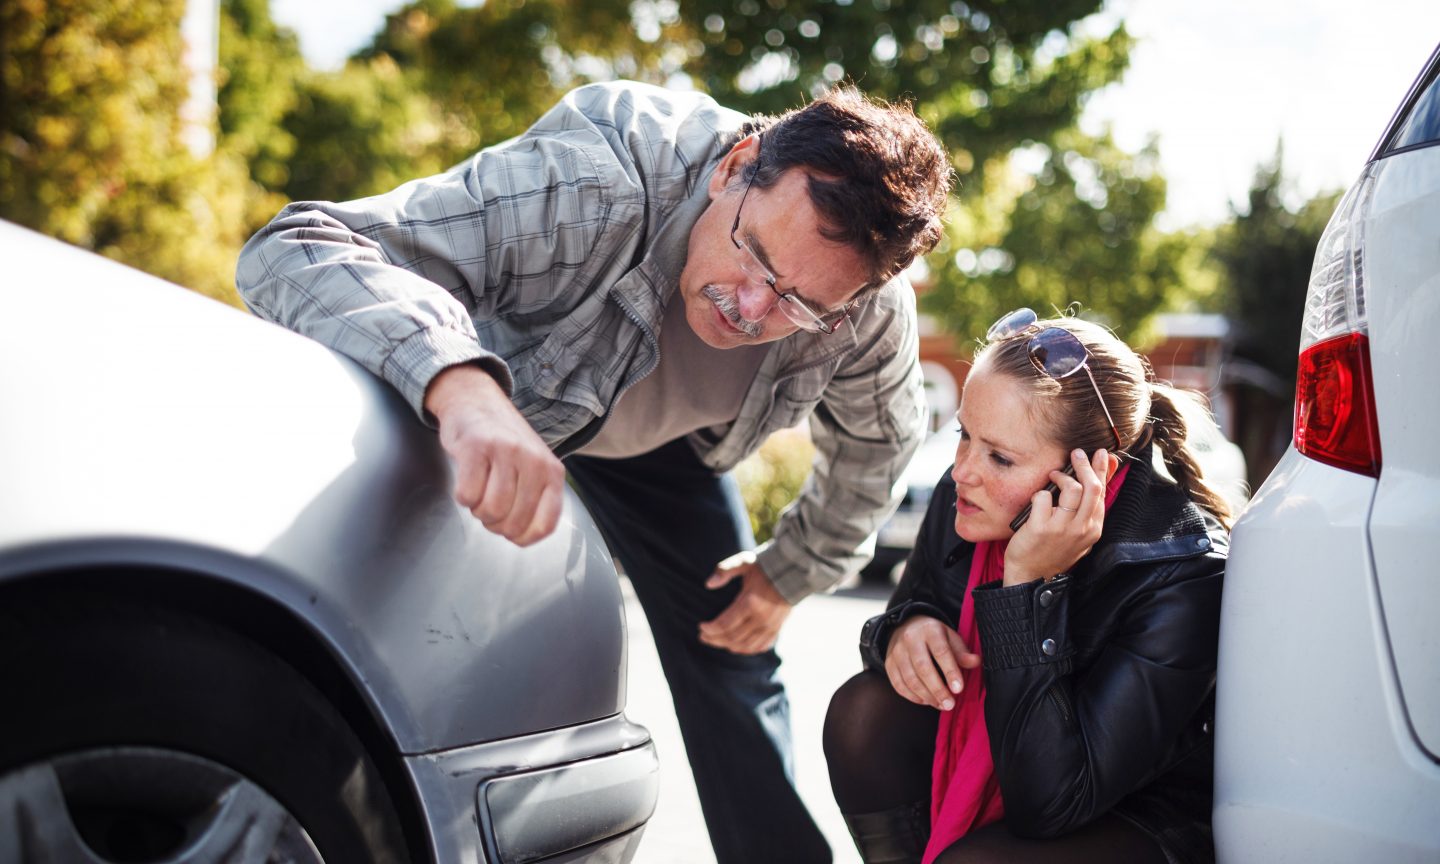 What to Do If You Have a Rental Car Accident - NerdWallet